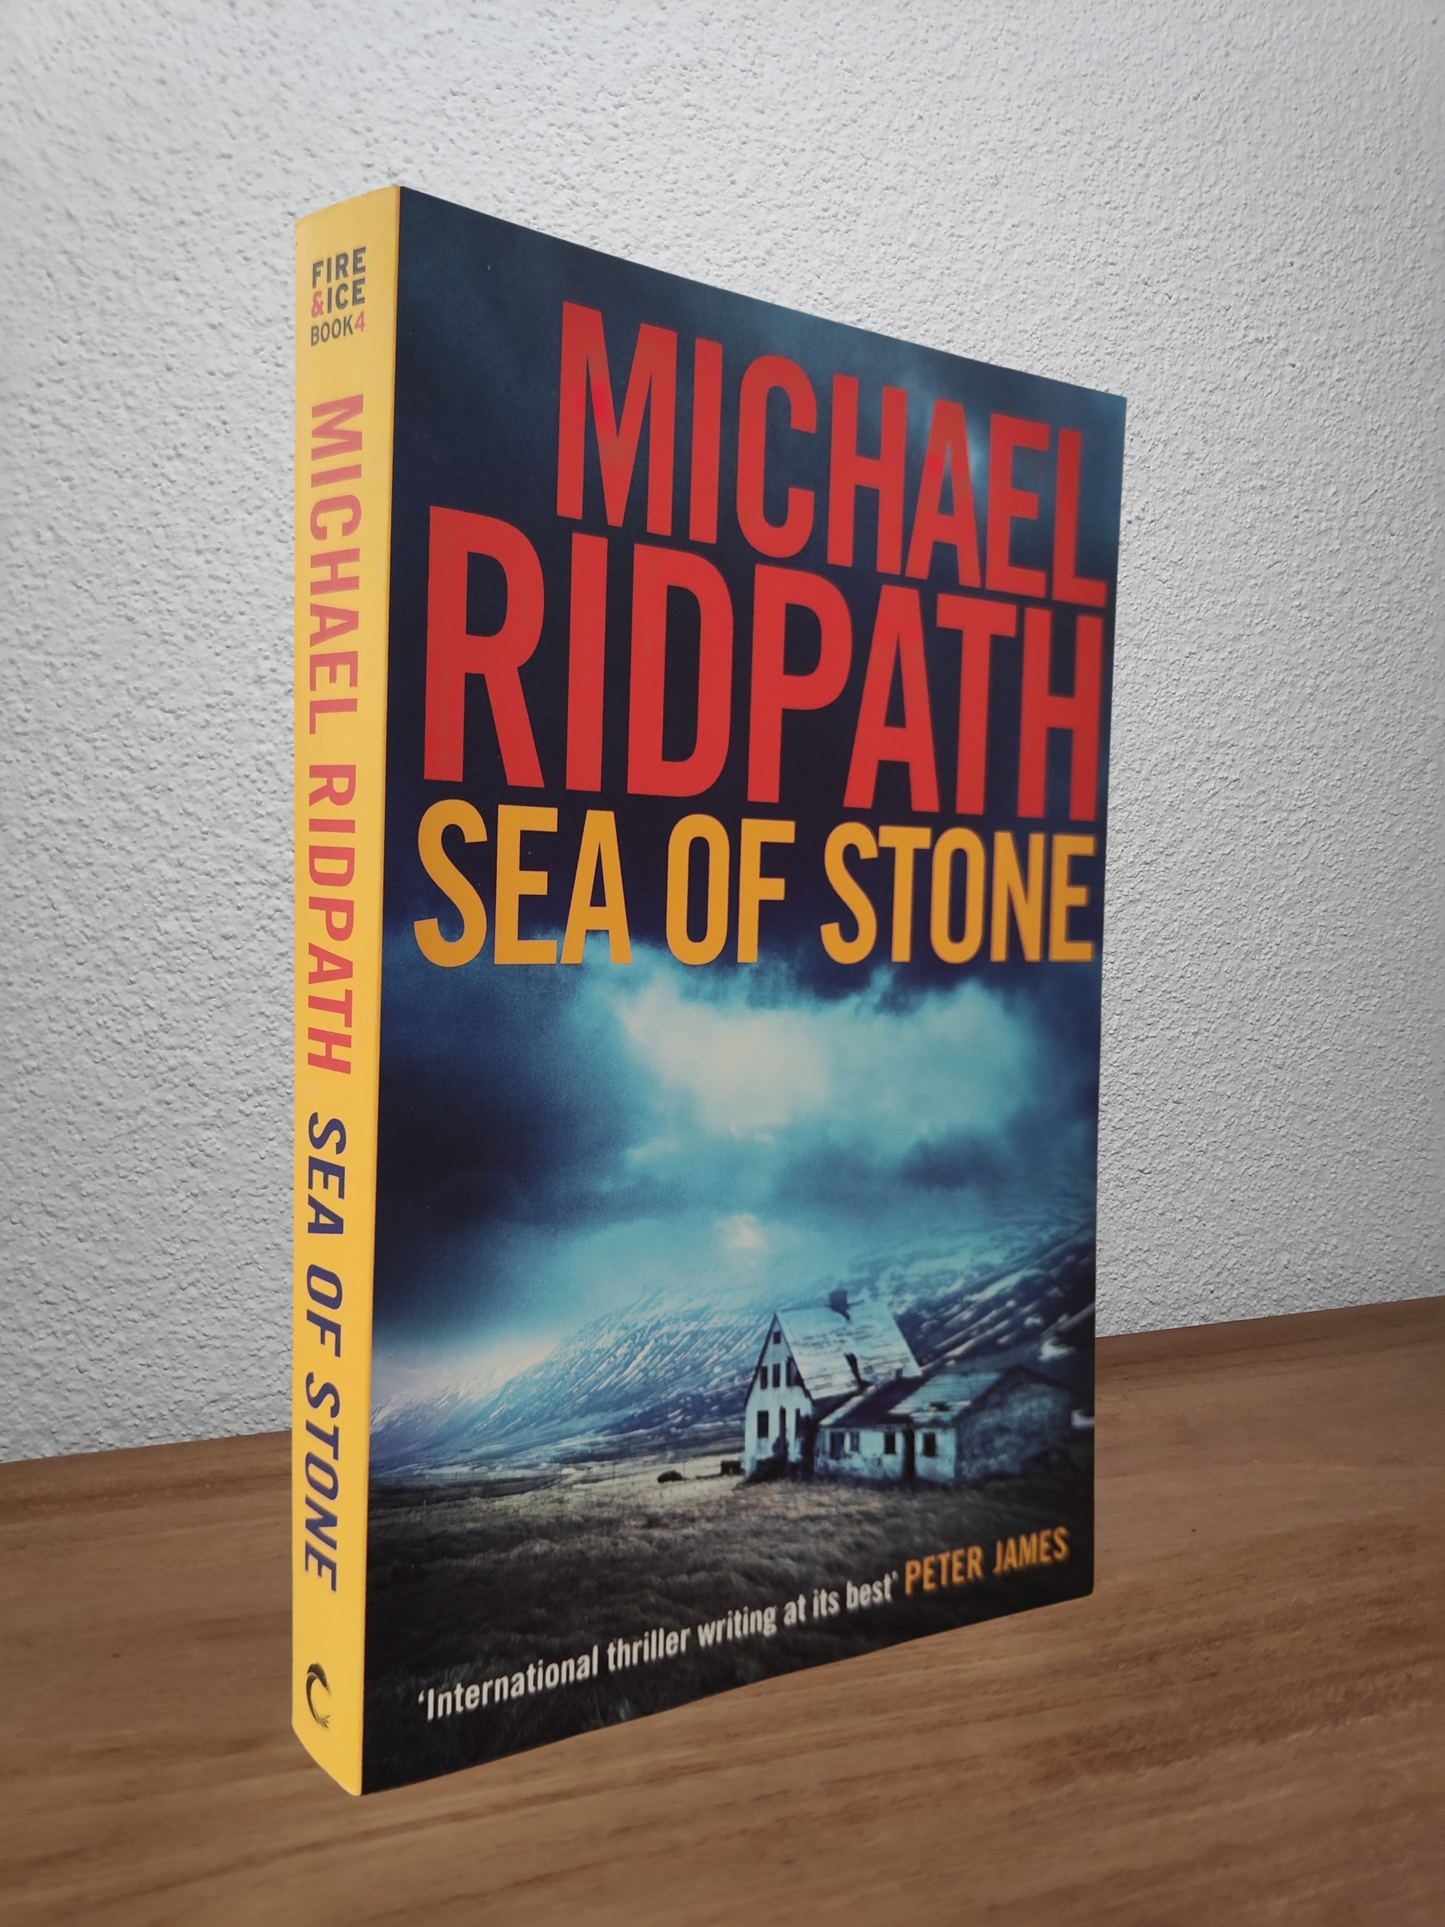 Michael Ridpath - Sea of Stone (Fire and Ice #4)